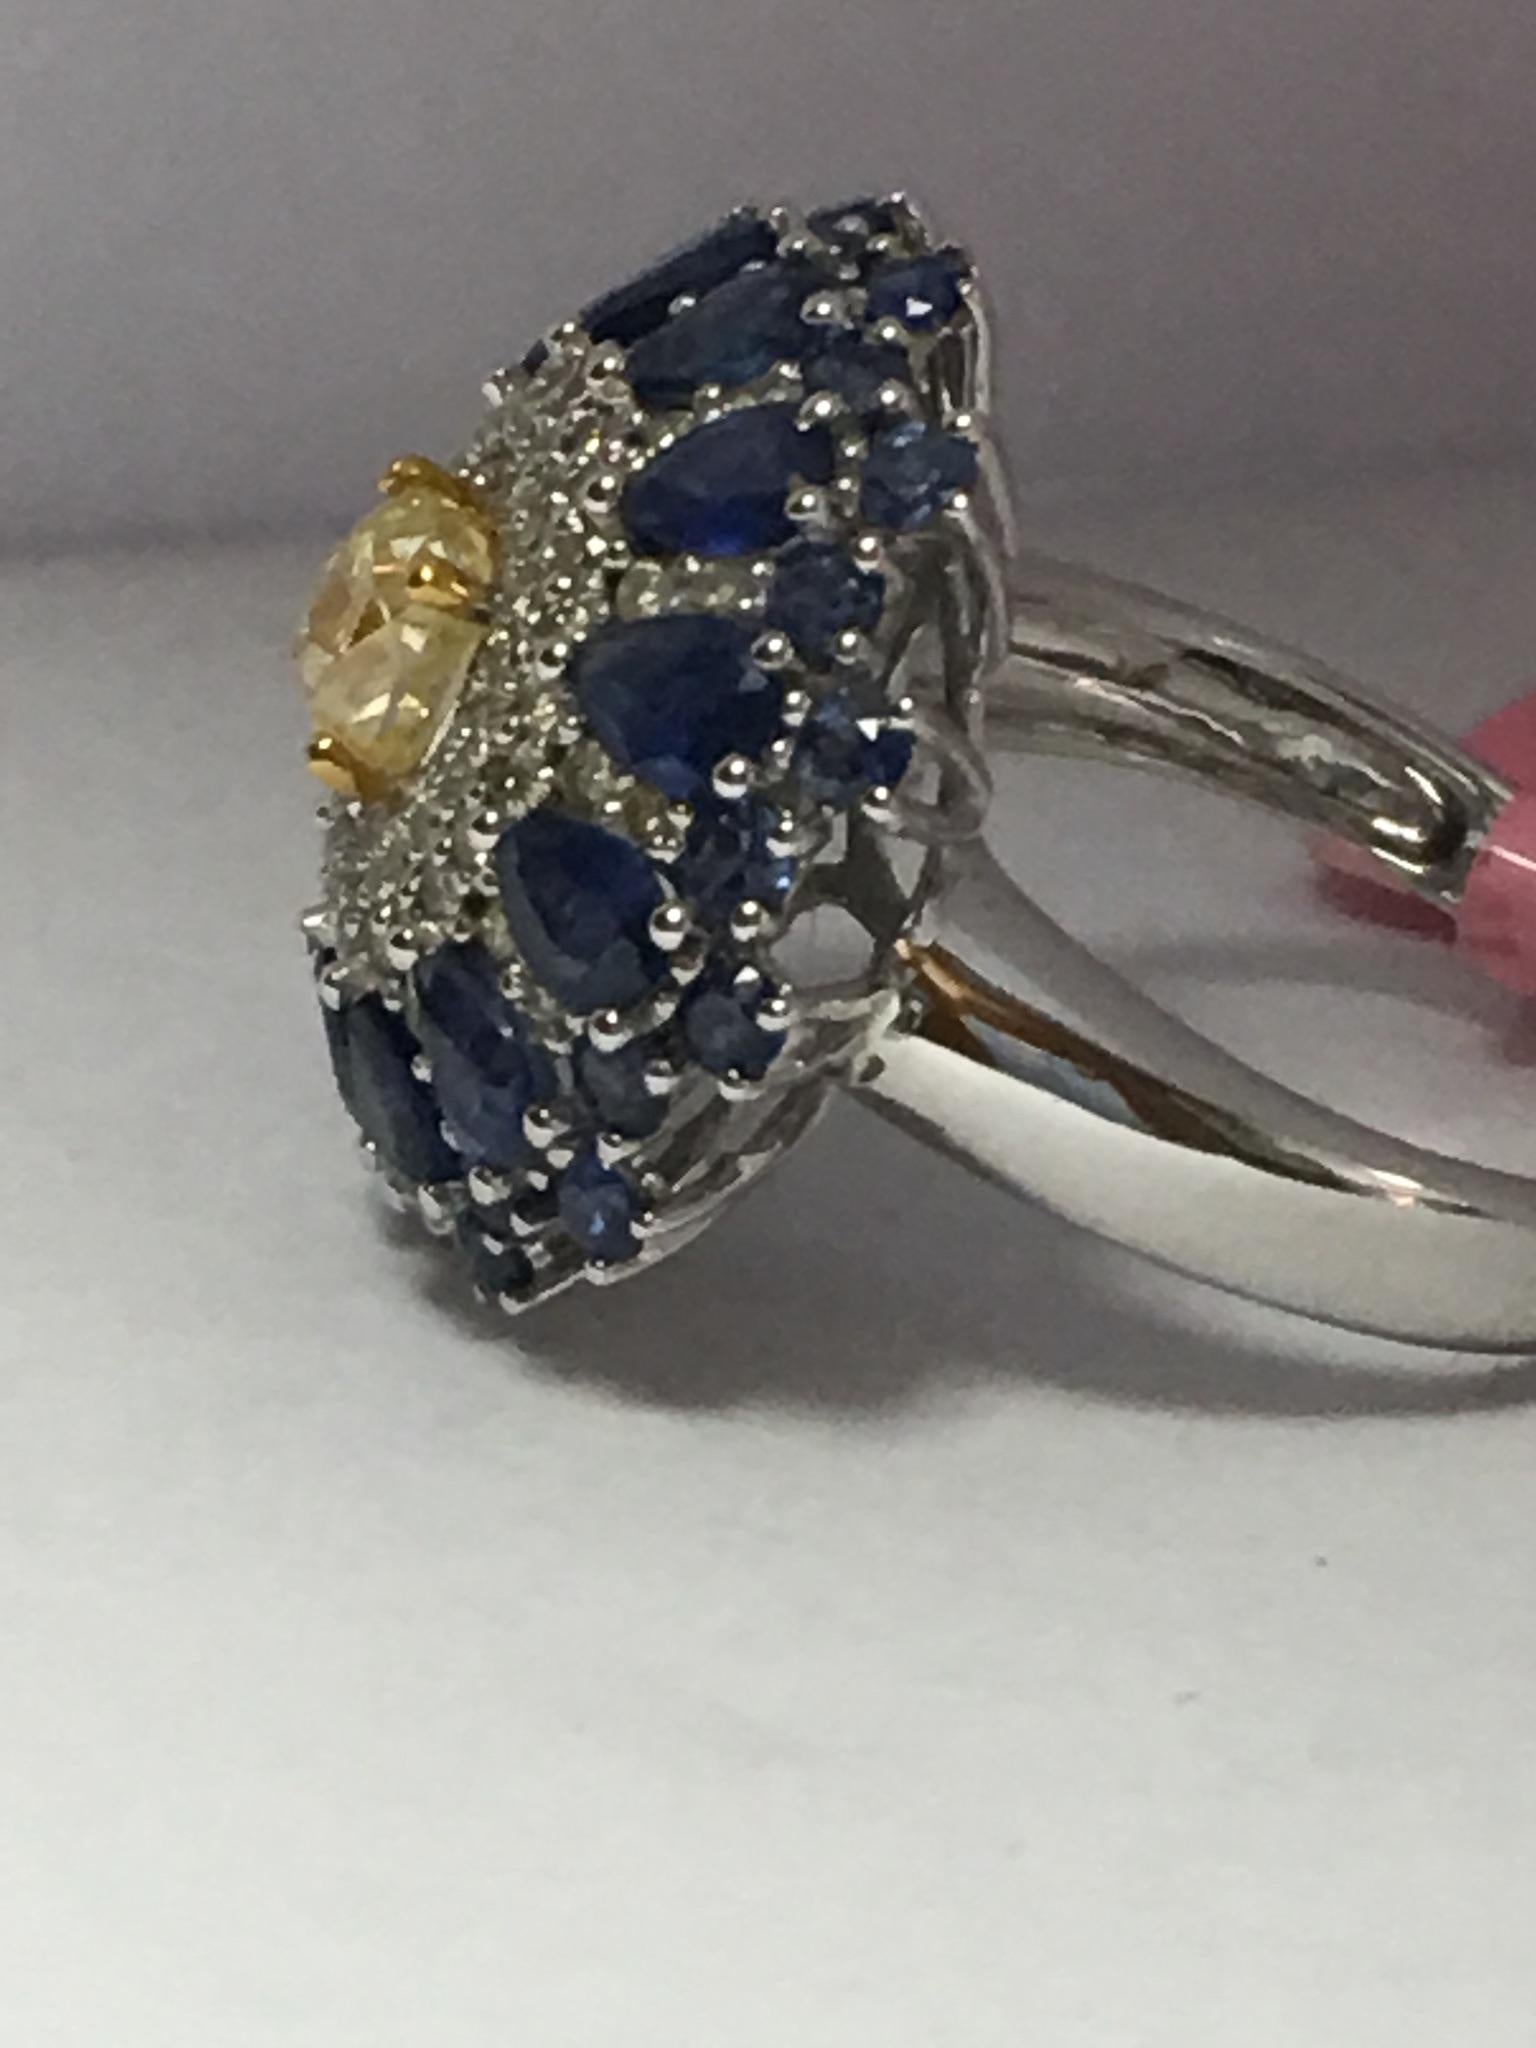 Natural fancy yellow diamonds . Blue sapphire and white diamonds set  in 14K two tone gold.
Total diamonds and sapphire weight is 4.69 Carat. Size of the ring is 7 and can be resized if needed.